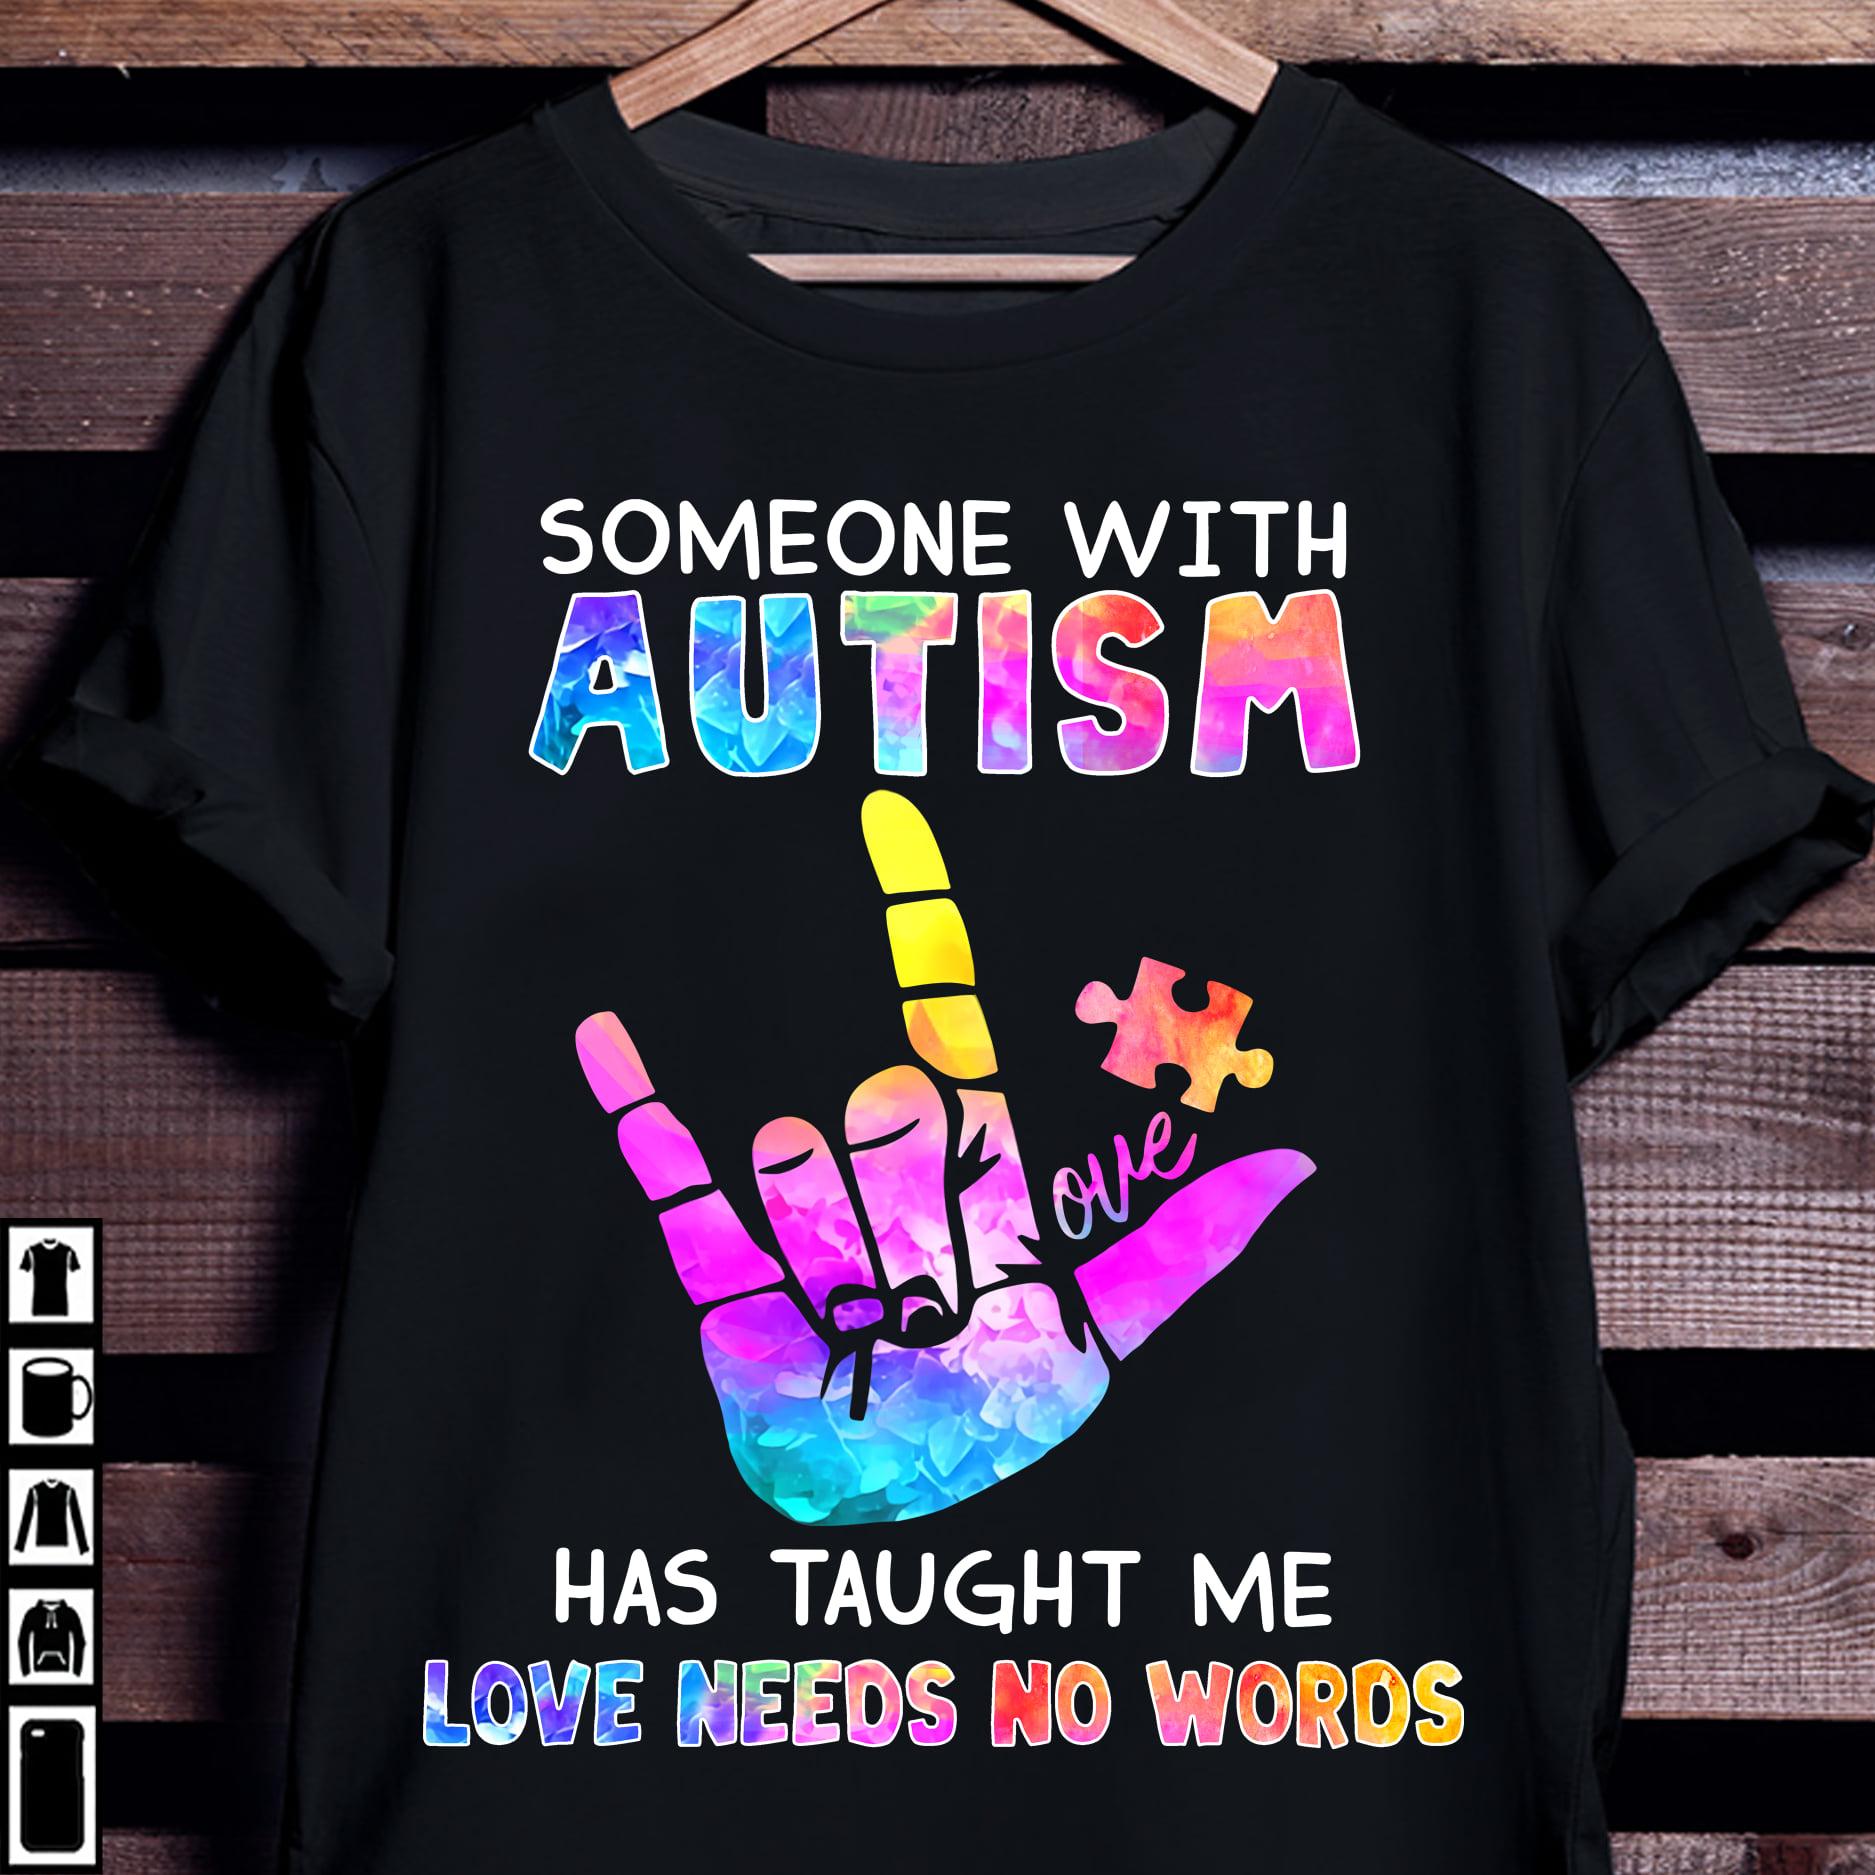 Someone with autism has taught me love needs no words - Autism awareness, Love autistic people